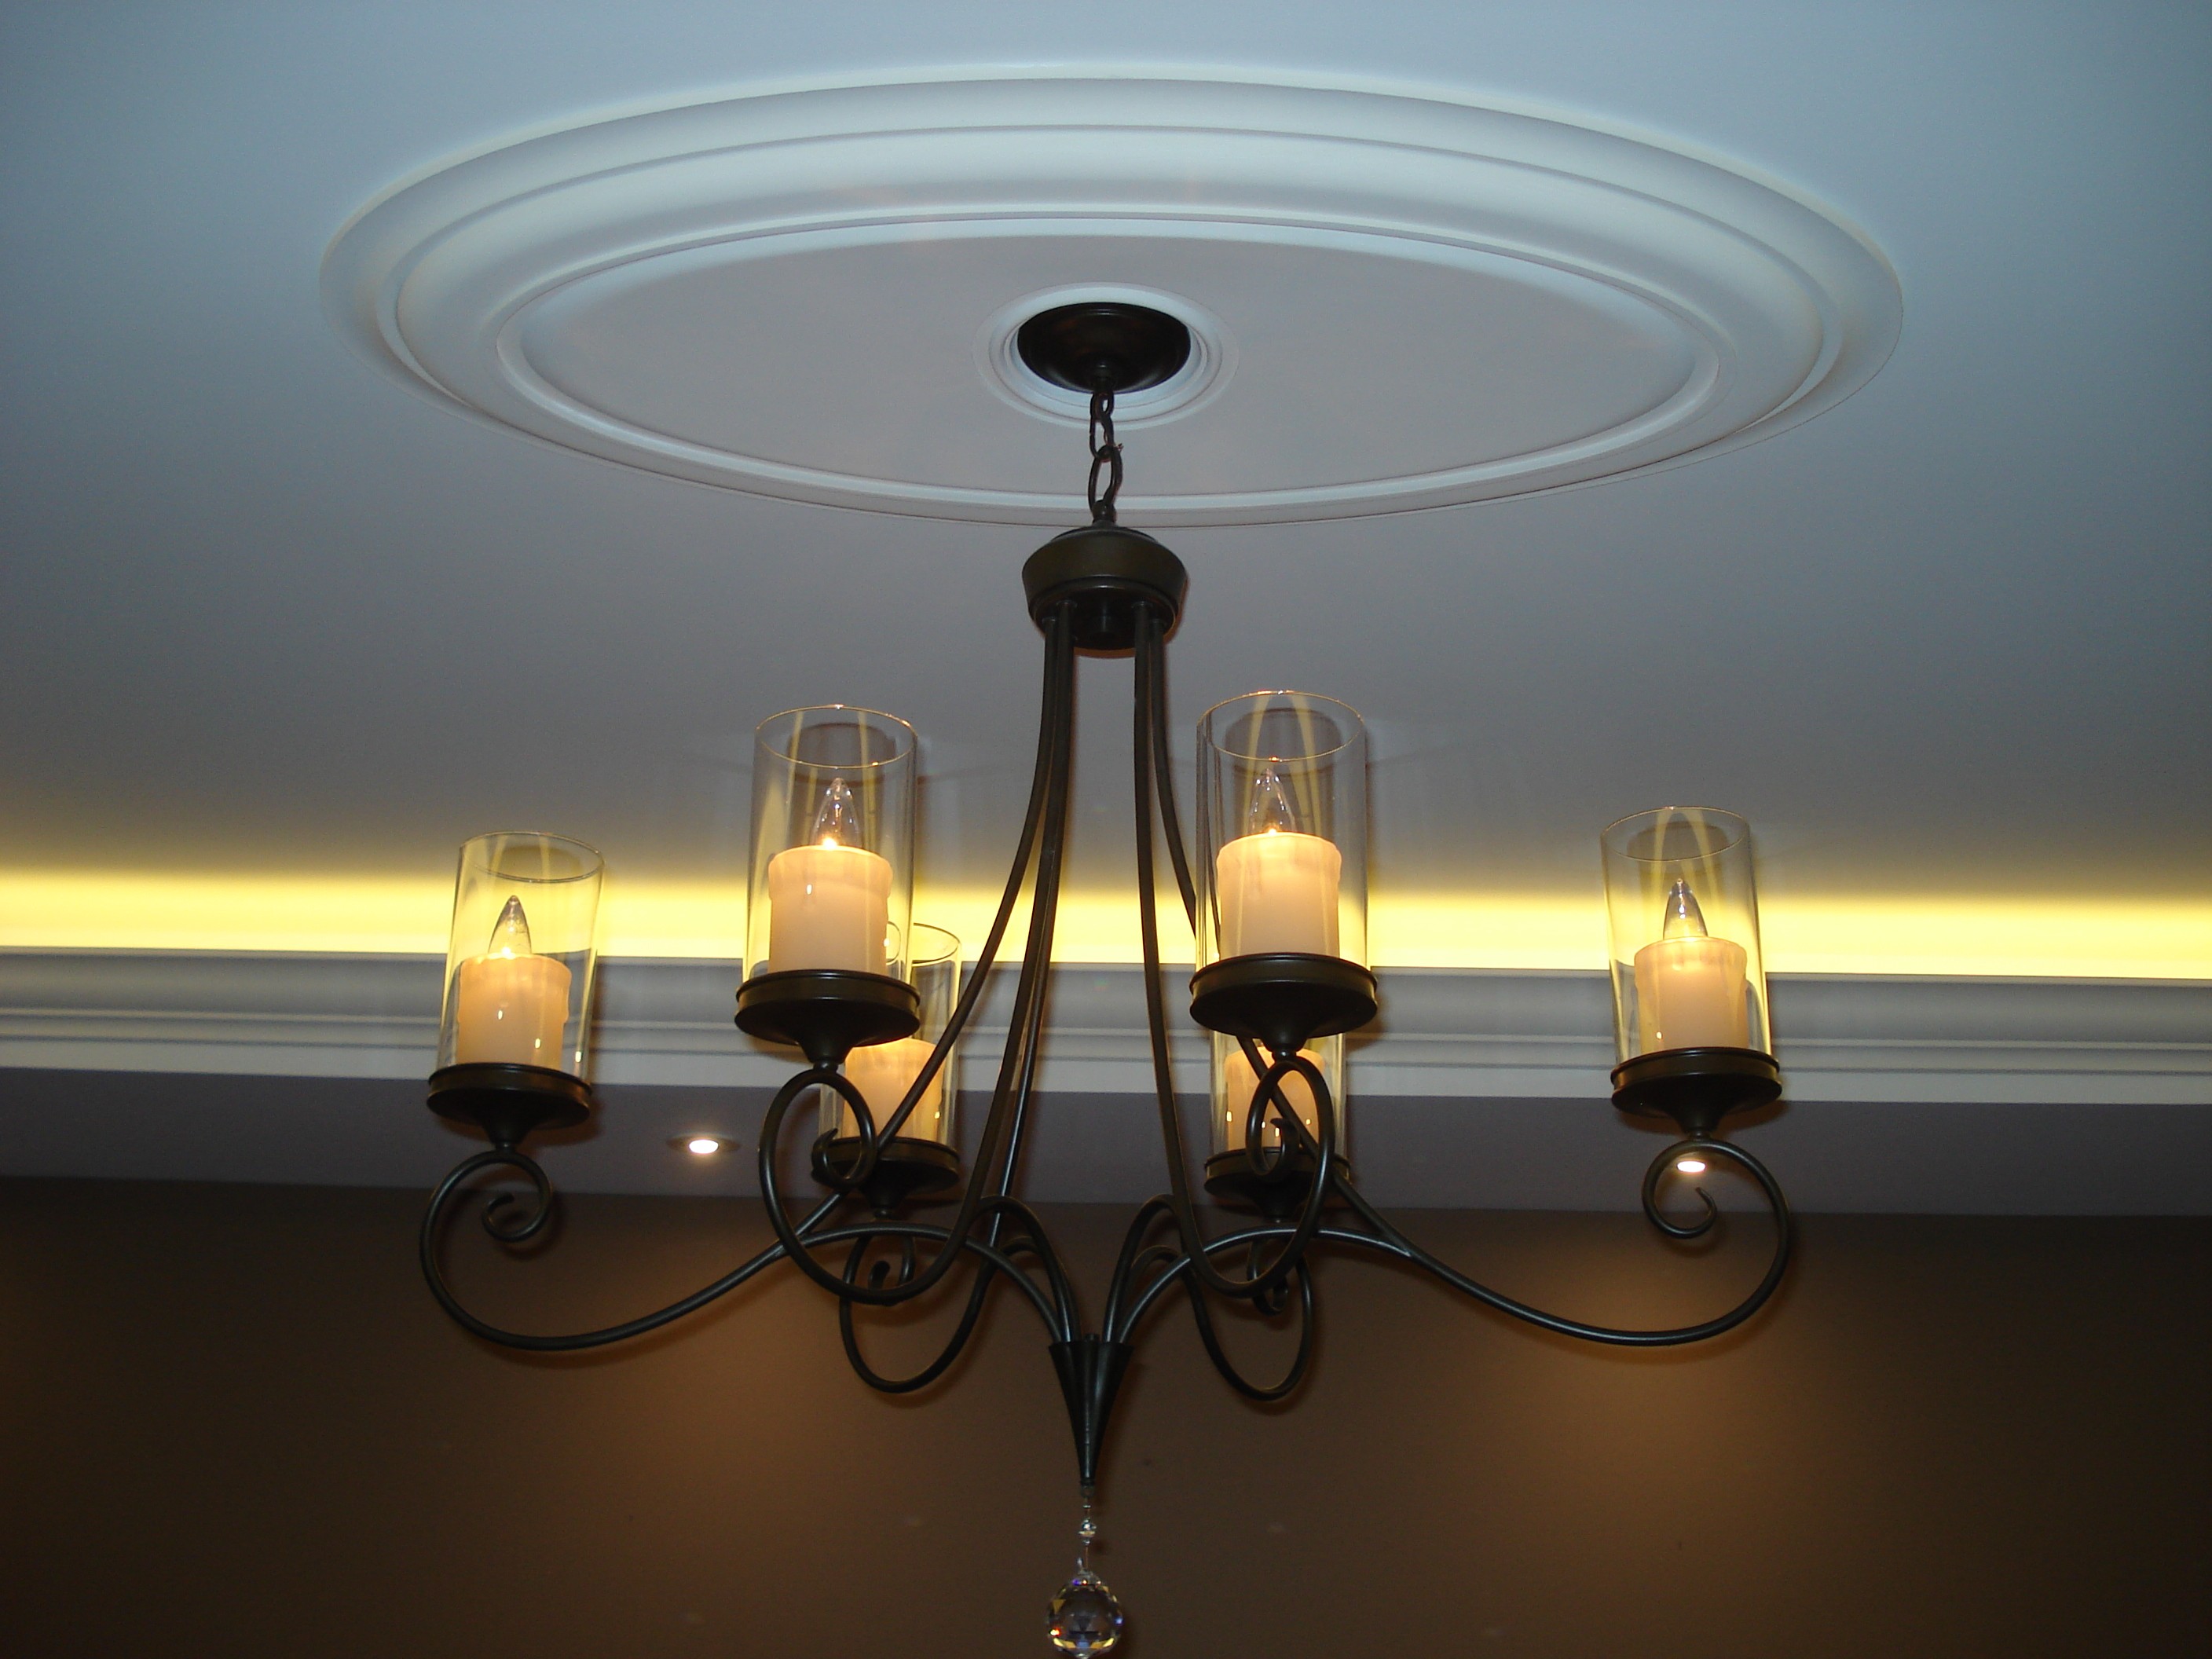 Extra Large Smooth 24" x 48" Oval Ceiling Medallion.